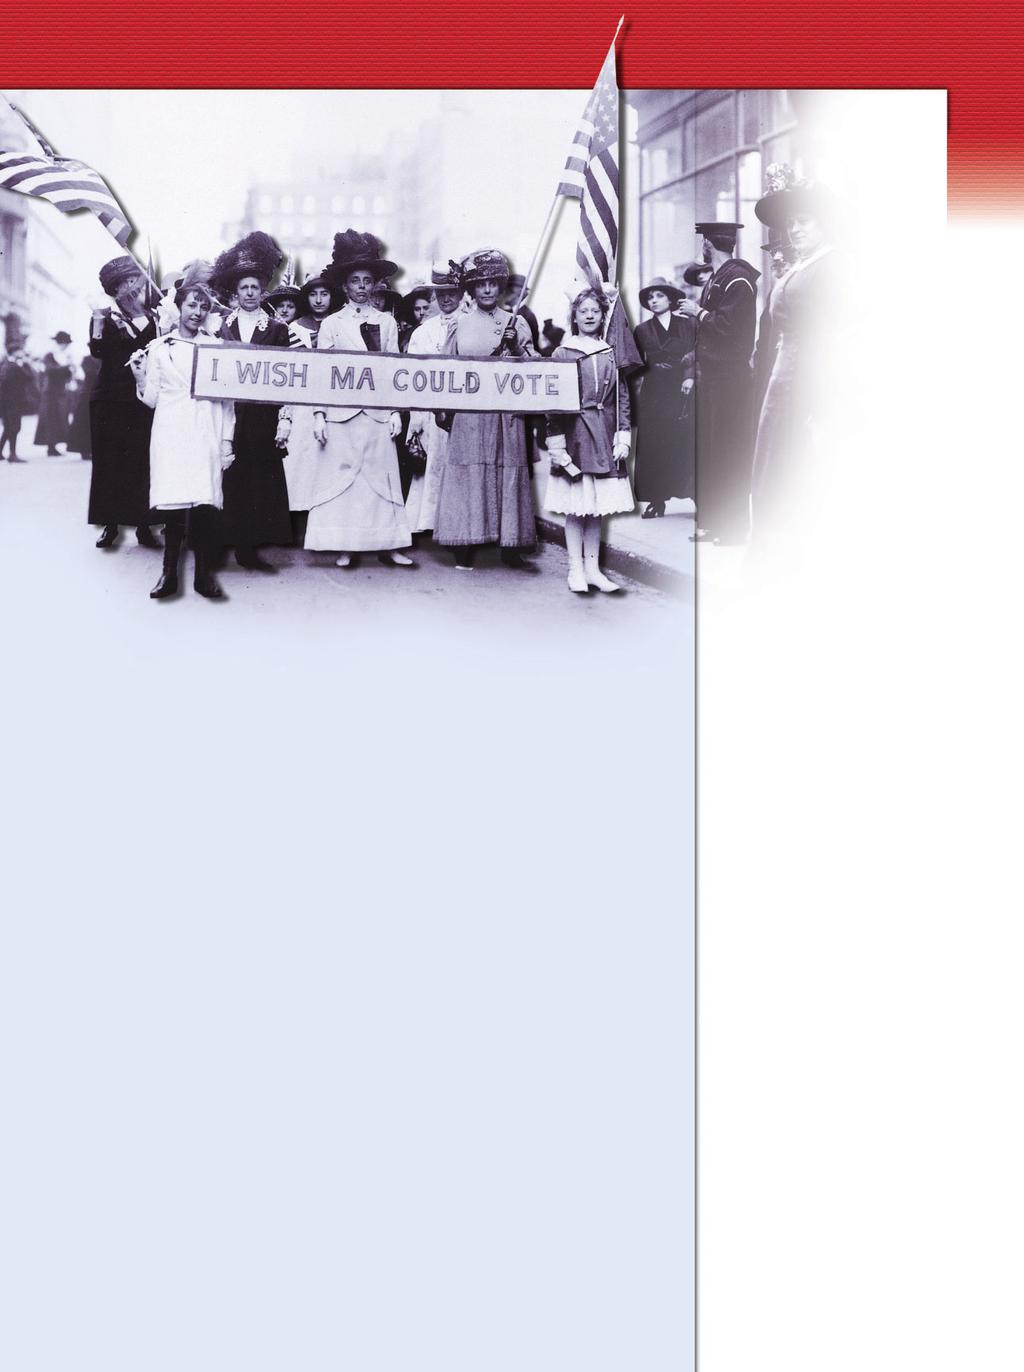 Image not available for use on this CD-ROM. Please refer to the image in the textbook. At left, marchers campaign for the 19th Amendment woman suffrage.